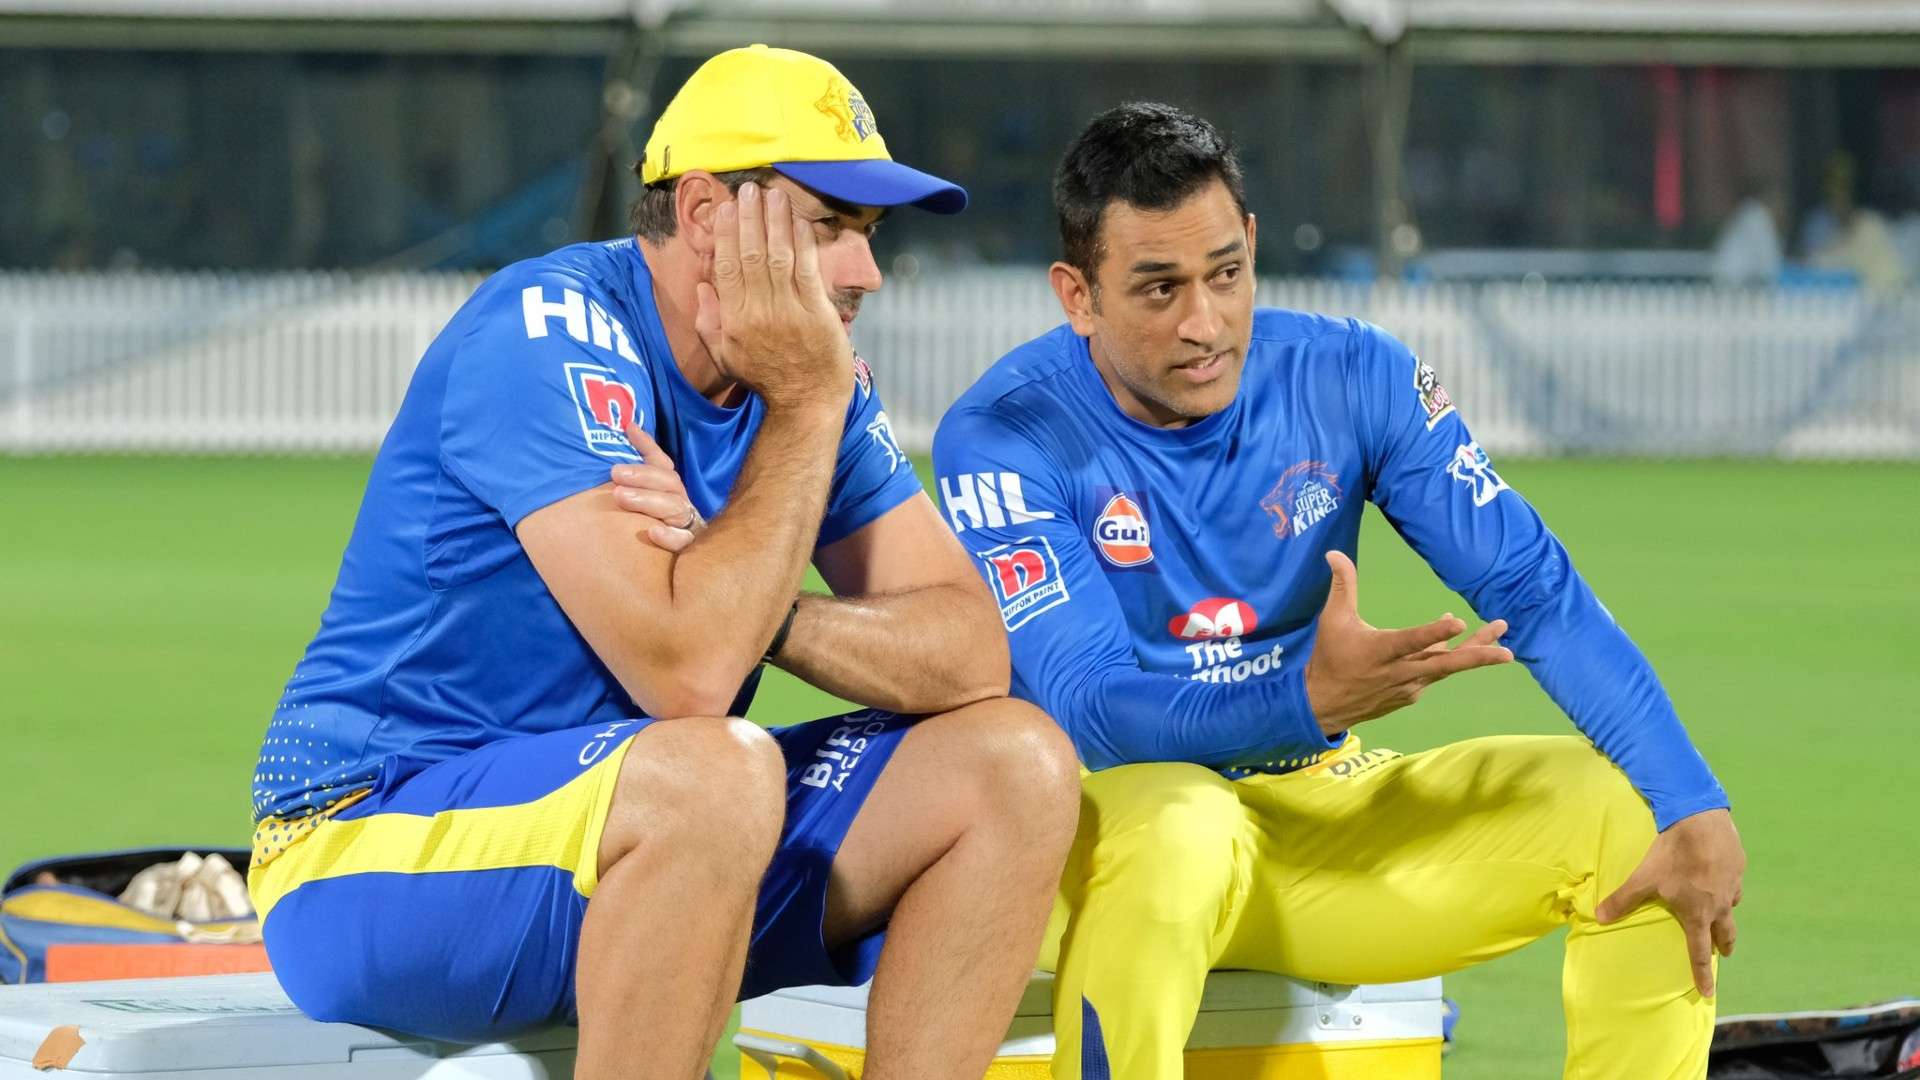 Stephen Fleming (L) with MS Dhoni; Credit: Chennai Super Kings Twitter page